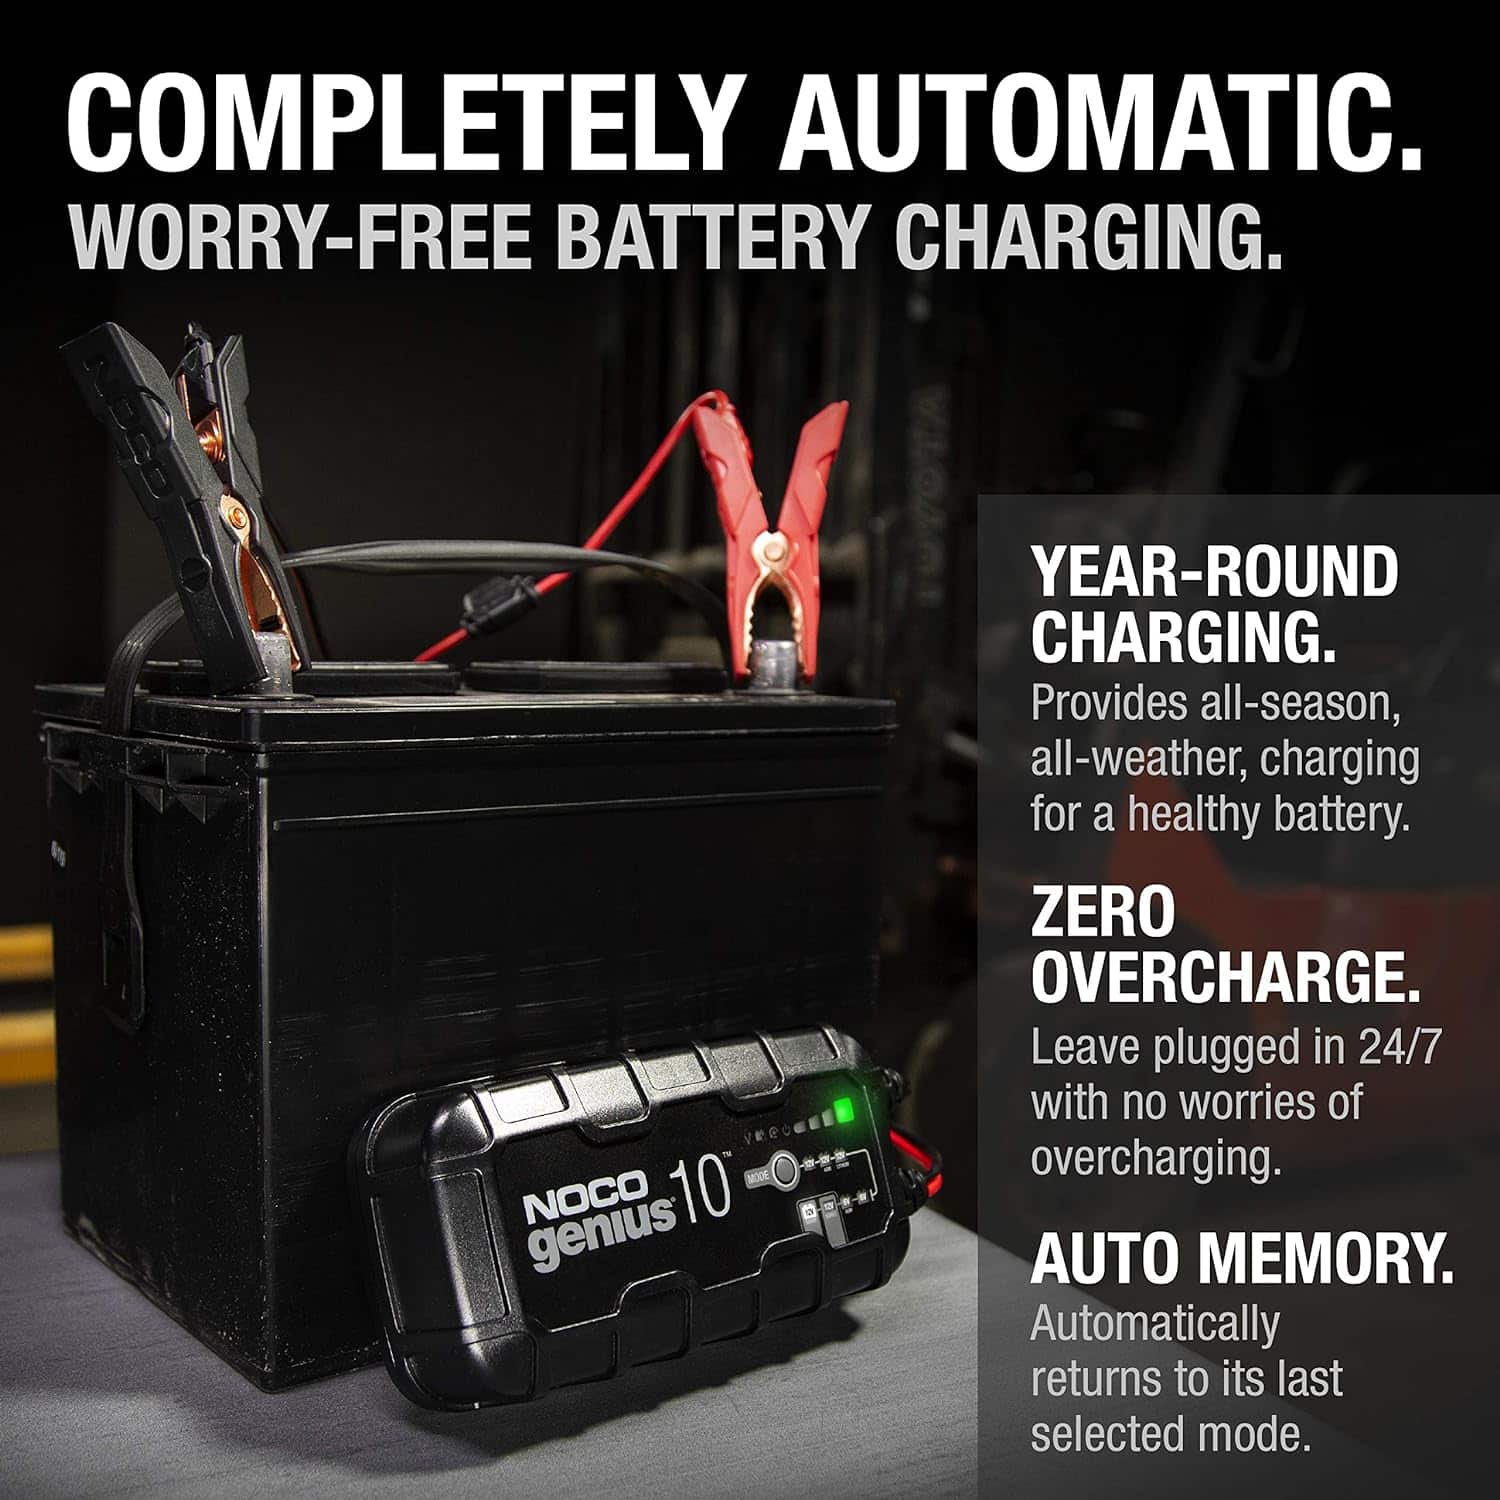 NOCO GENIUS10UK, 10A Car Battery Charger, 6V and 12V Portable Smart Charger-0236